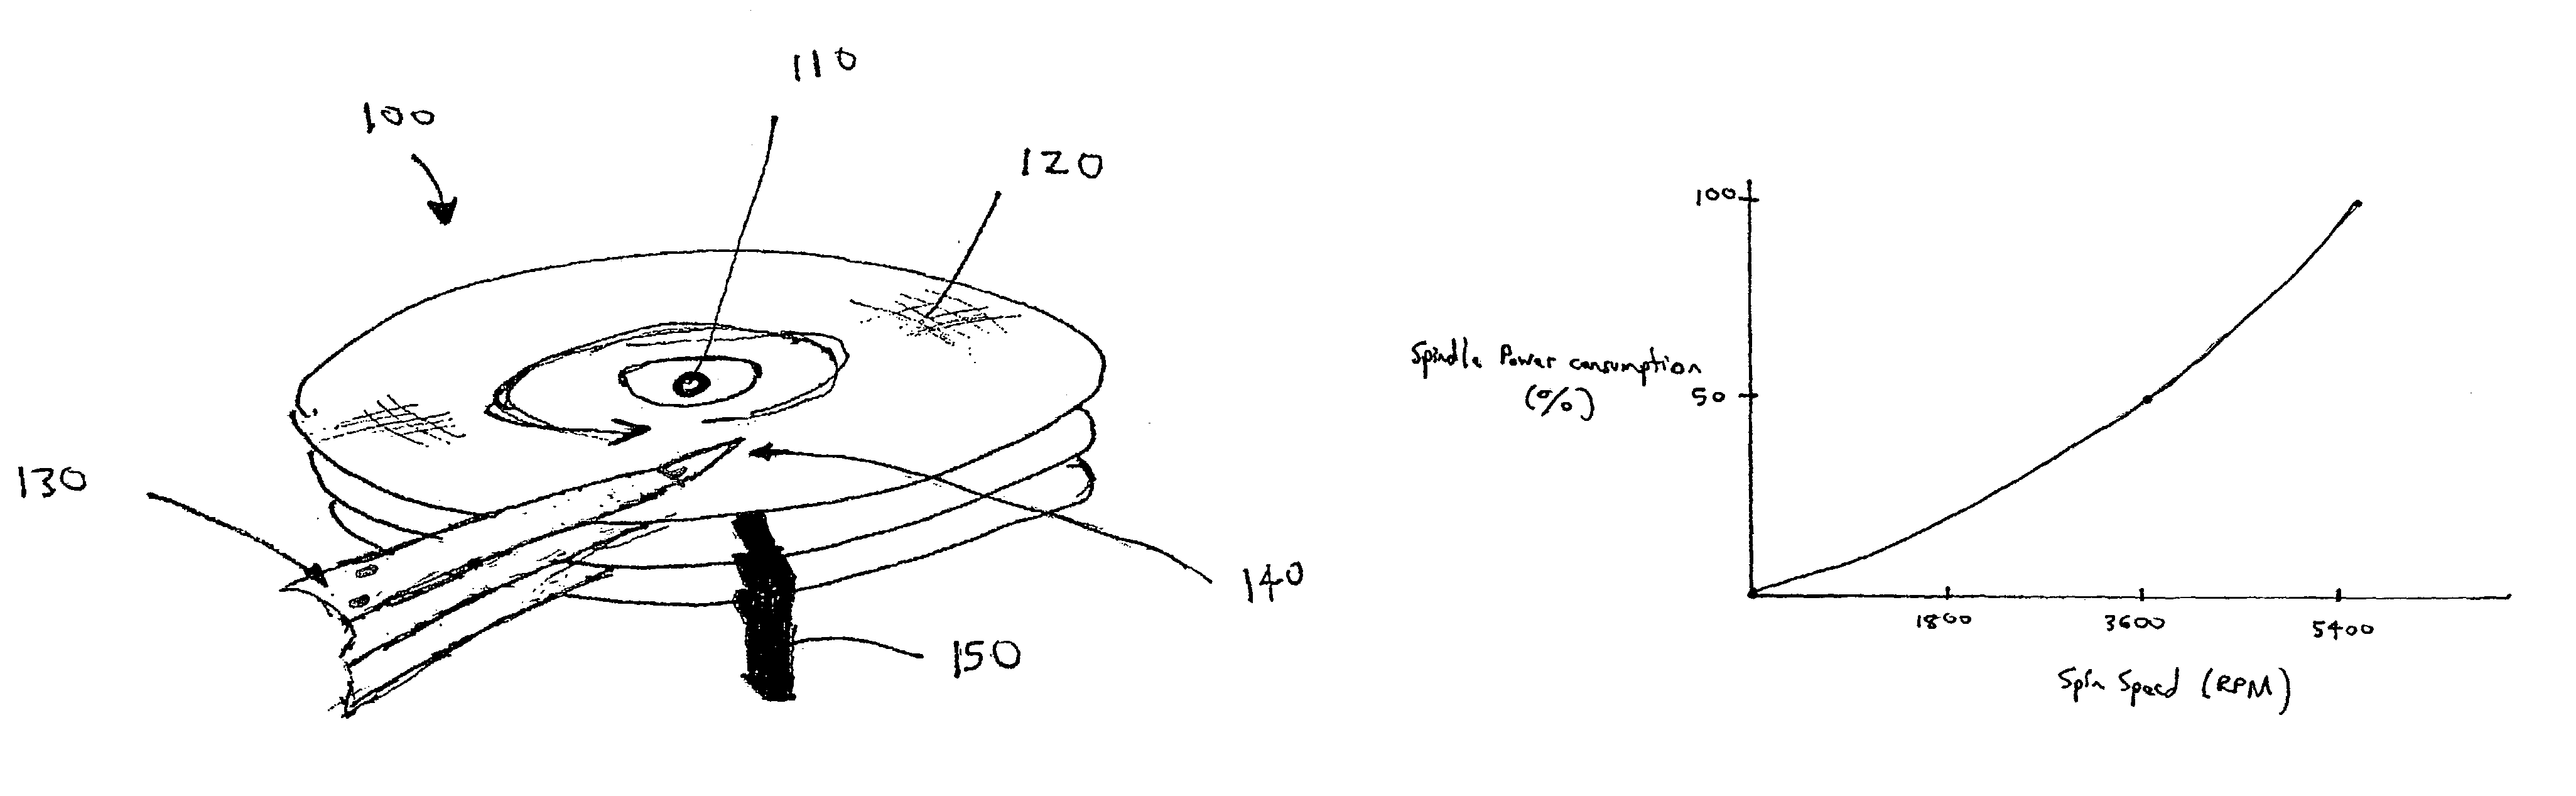 Intermediate power down mode for a rotatable media data storage device